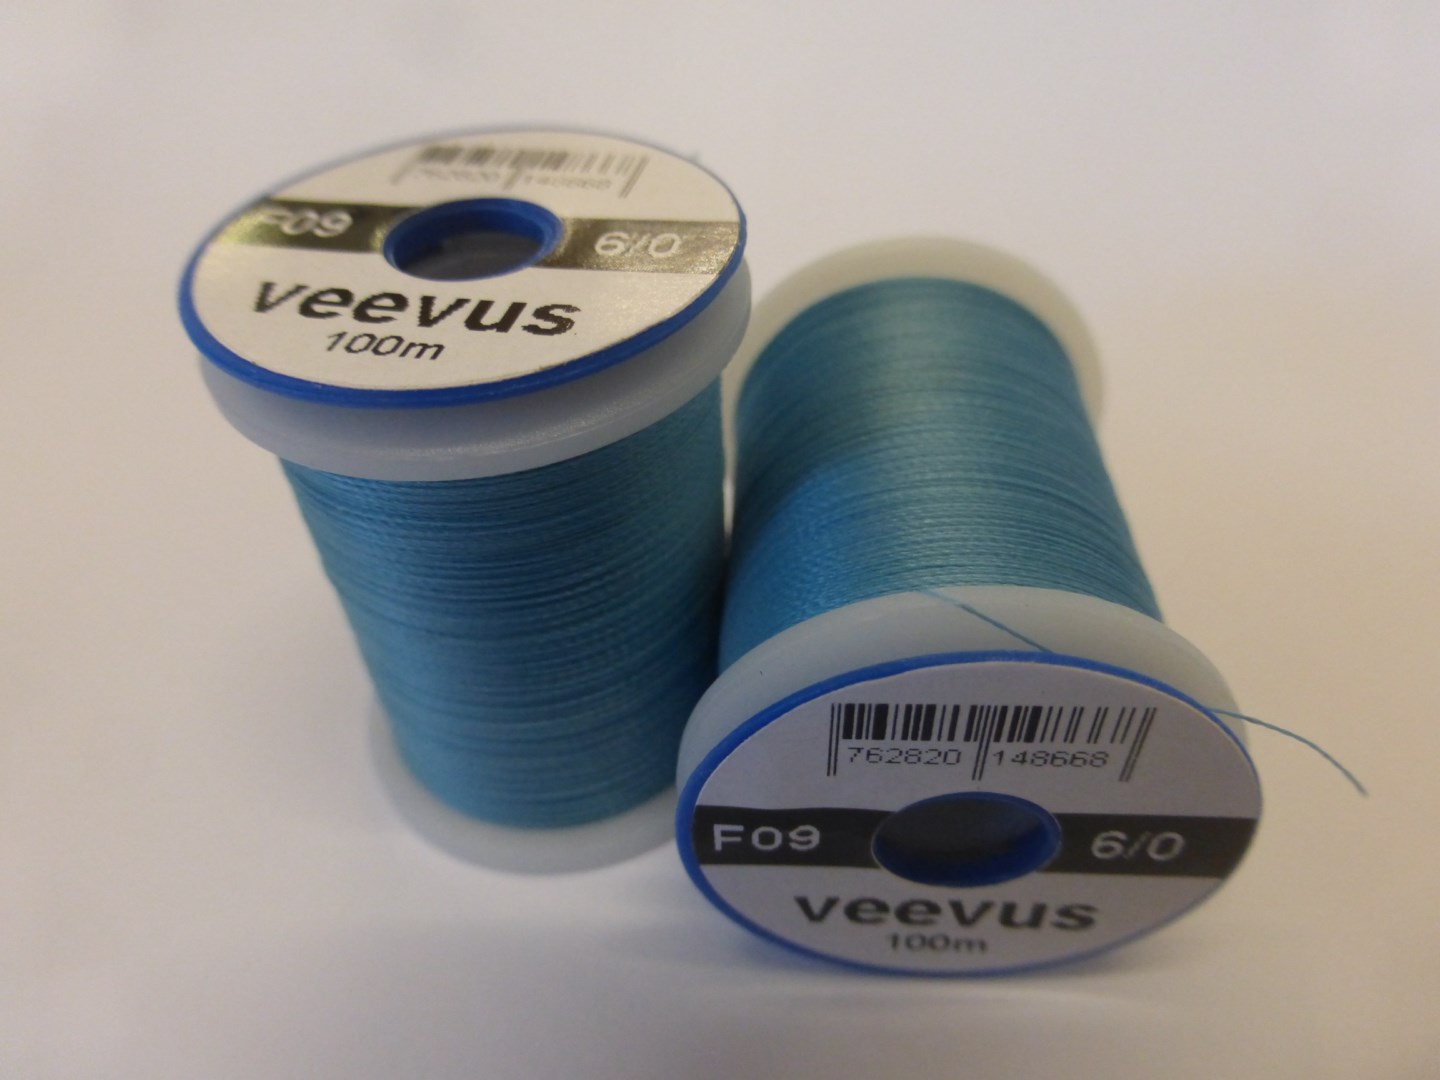 Veevus 6/0 Silver Doctor Blue F09